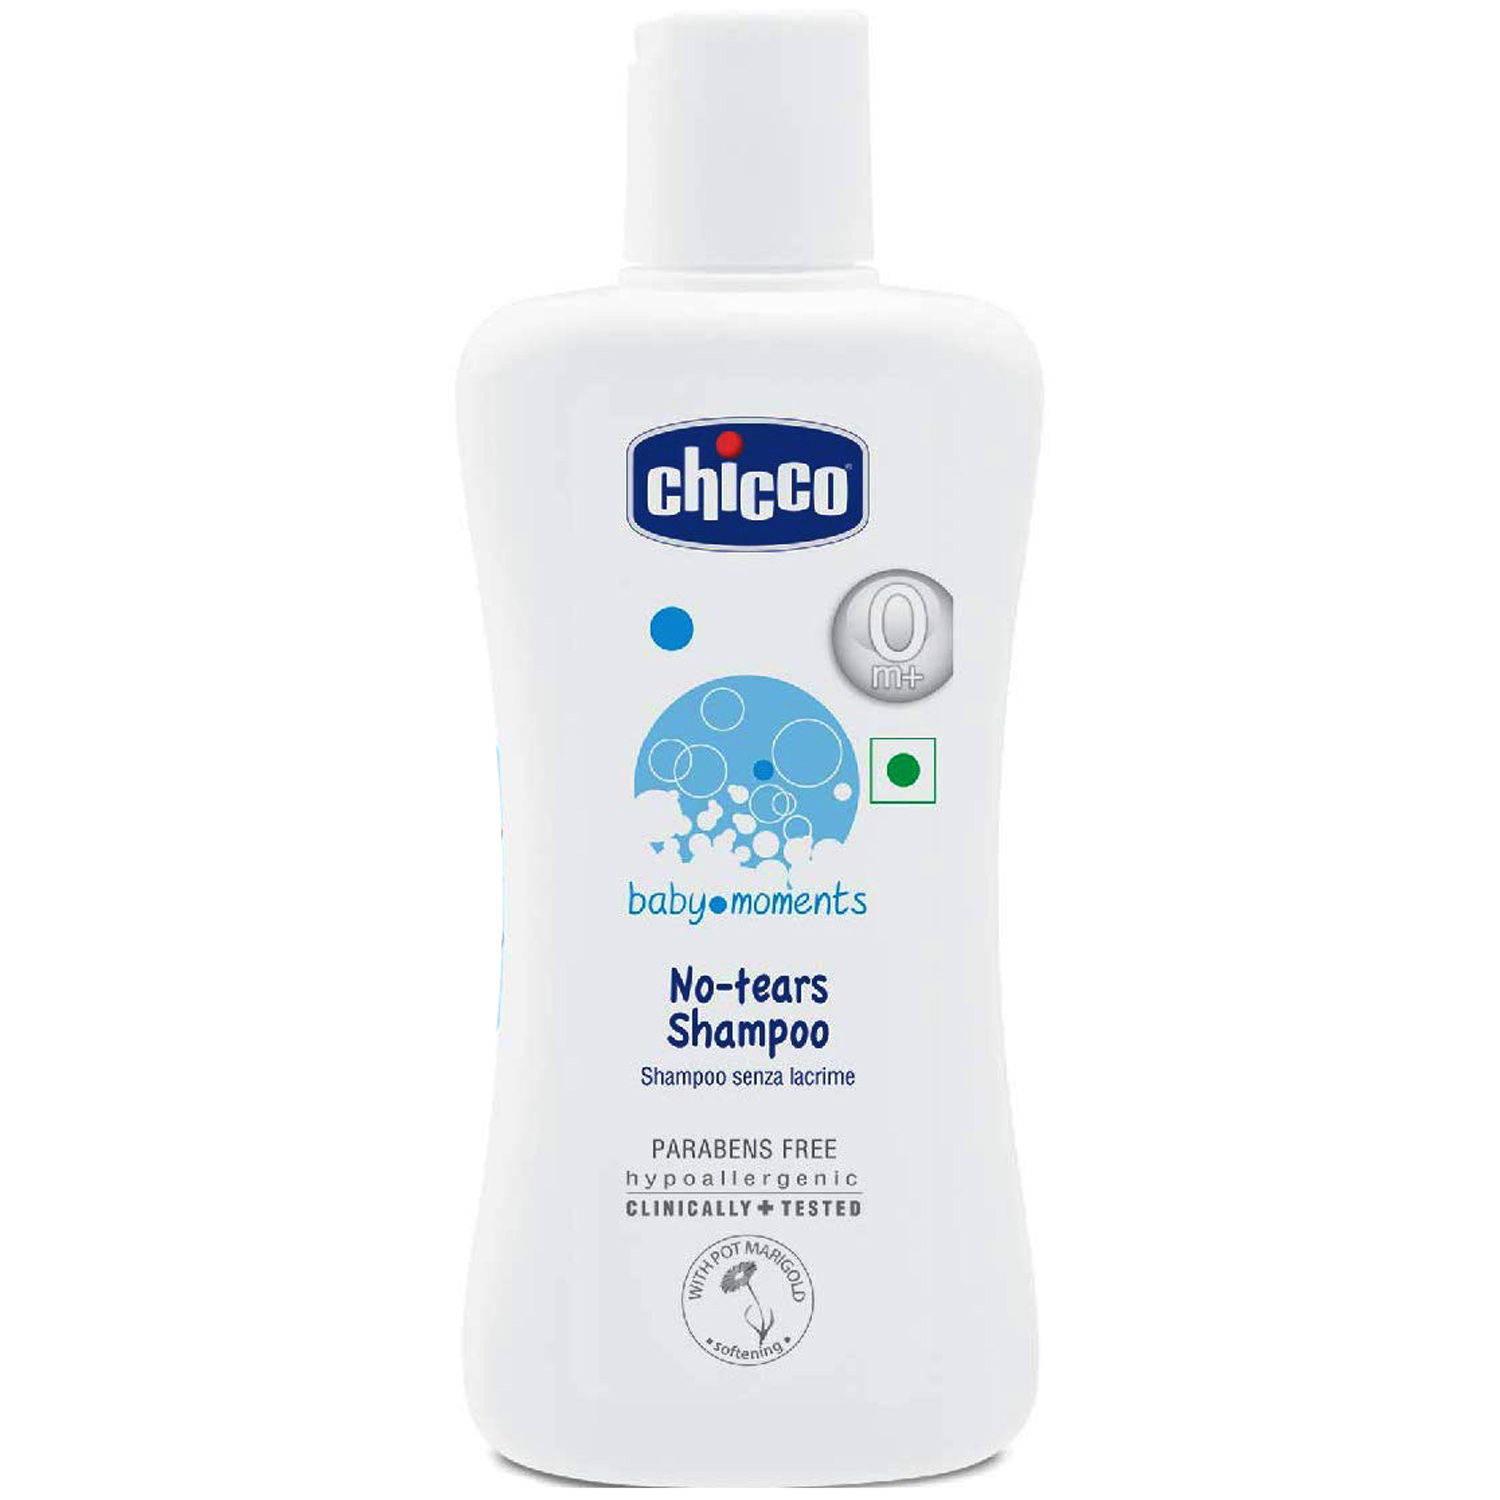 Chicco Baby Moments No Tears Shampoo, 200 ml, Pack of 1 